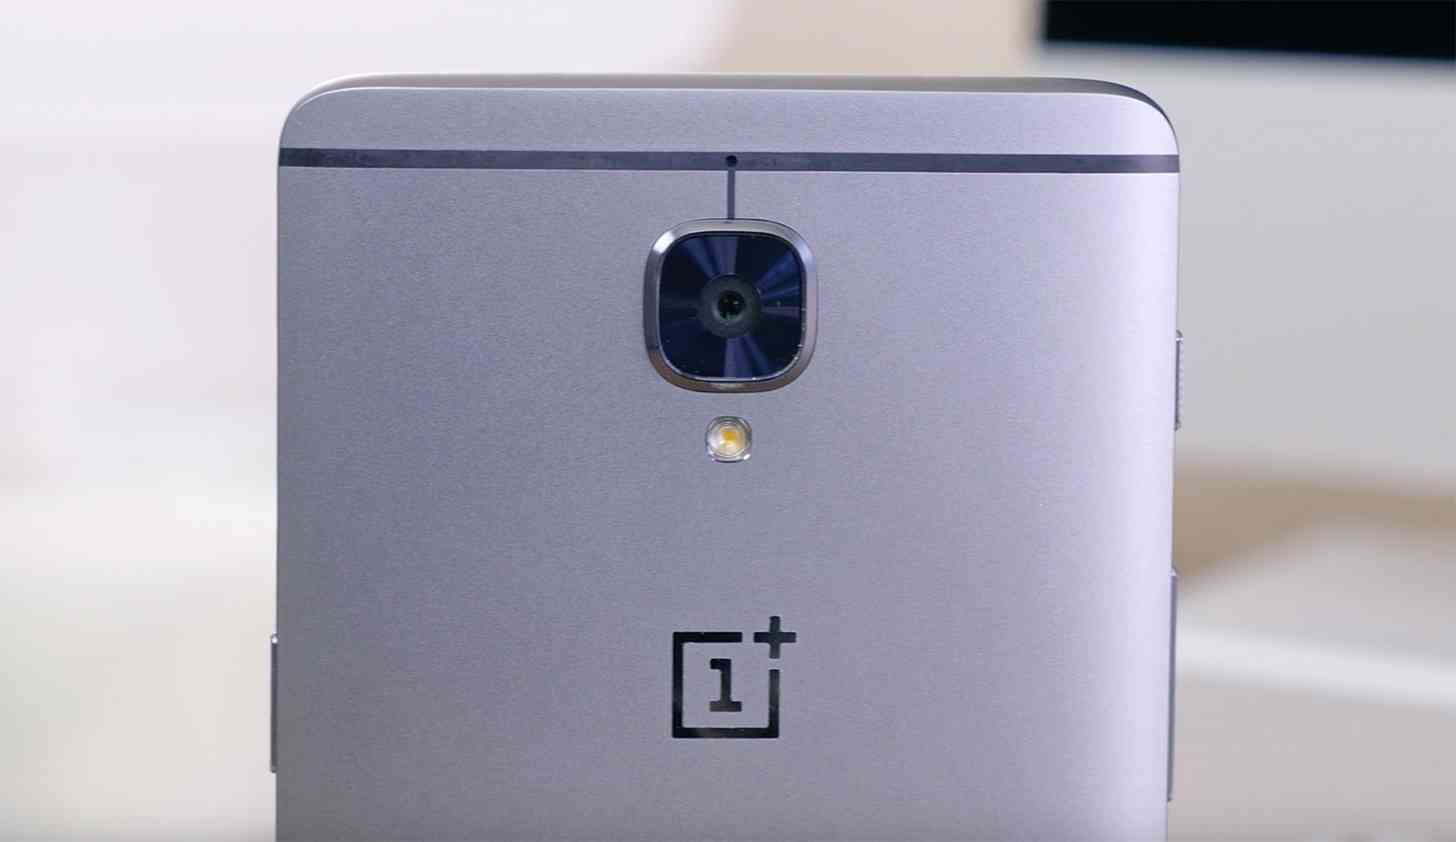 OnePlus 3 hands-on photo